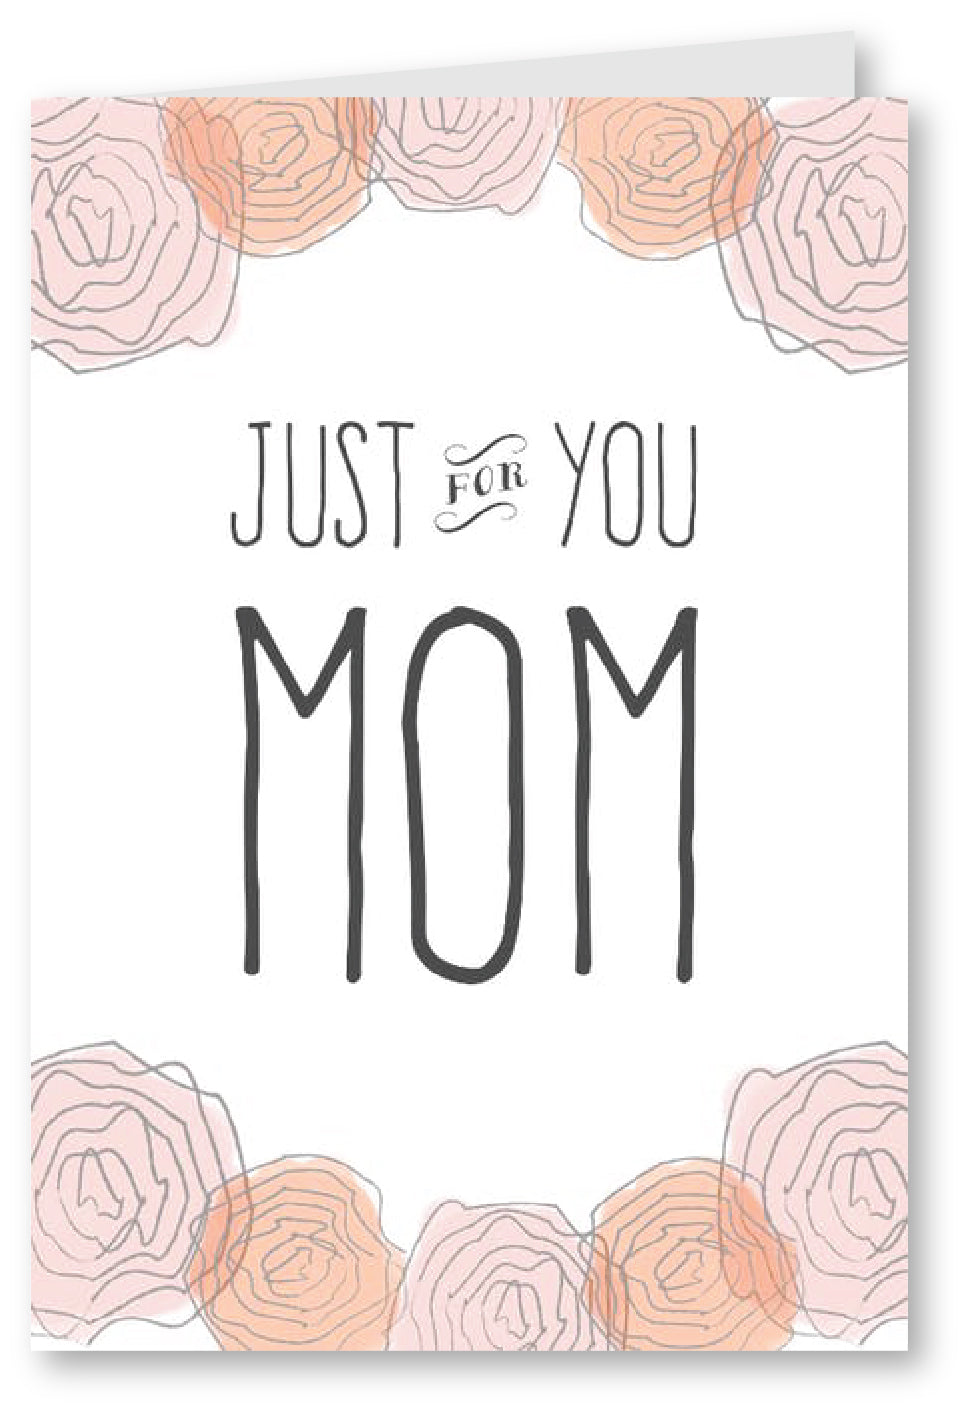 Mom All day Smile - Birthday Card